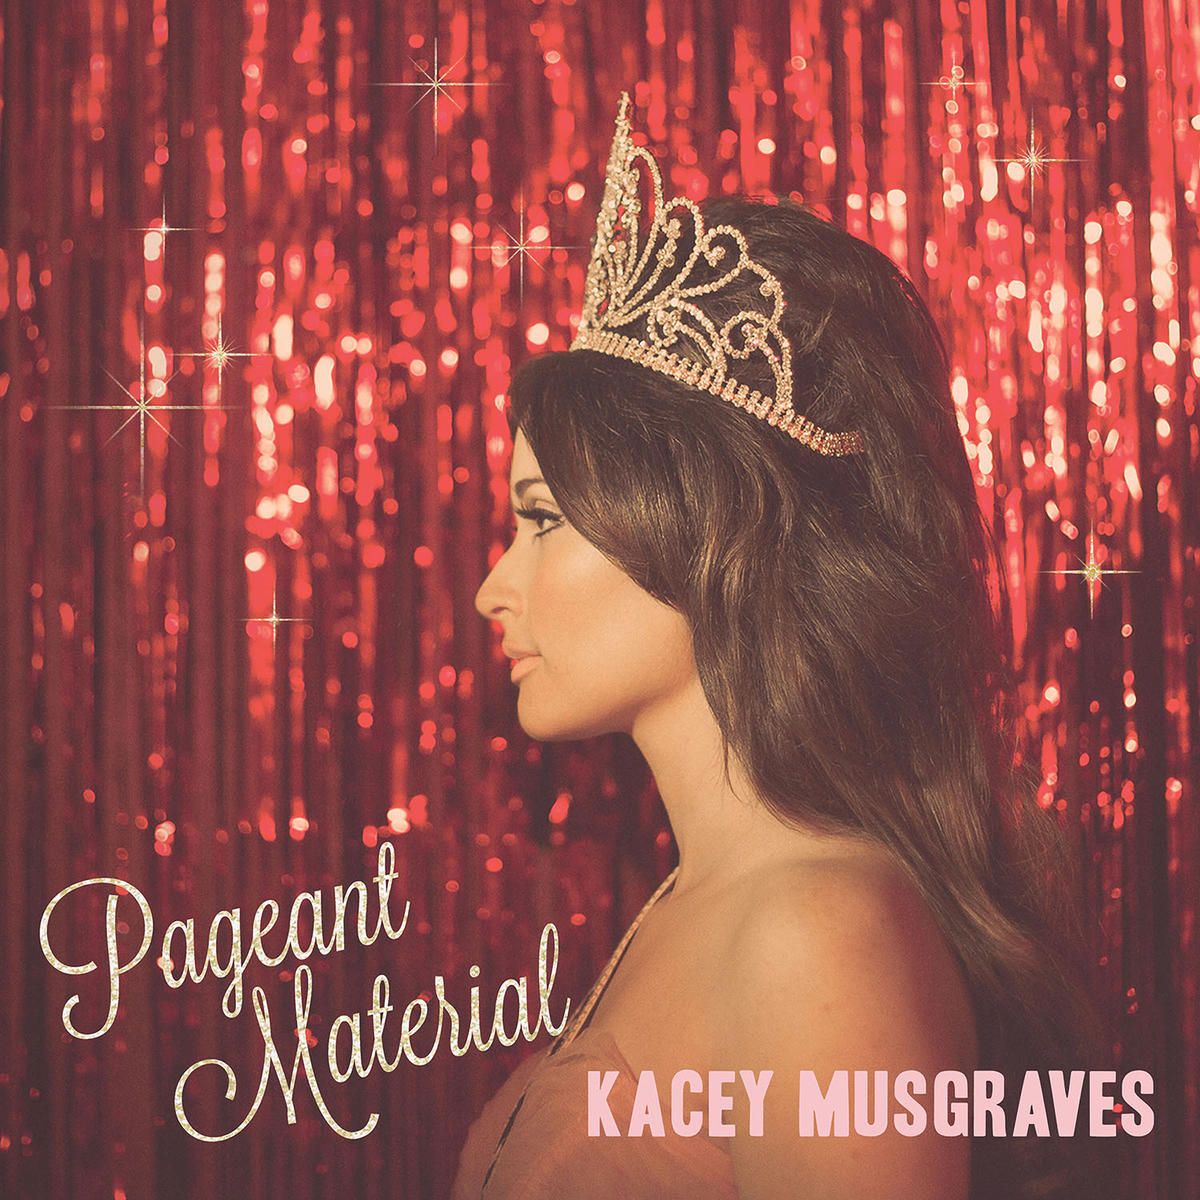 KACEY MUSGRAVES’ PAGEANT MATERIAL DEBUTS  NO. 1 ON BILLBOARD COUNTRY ALBUMS CHART